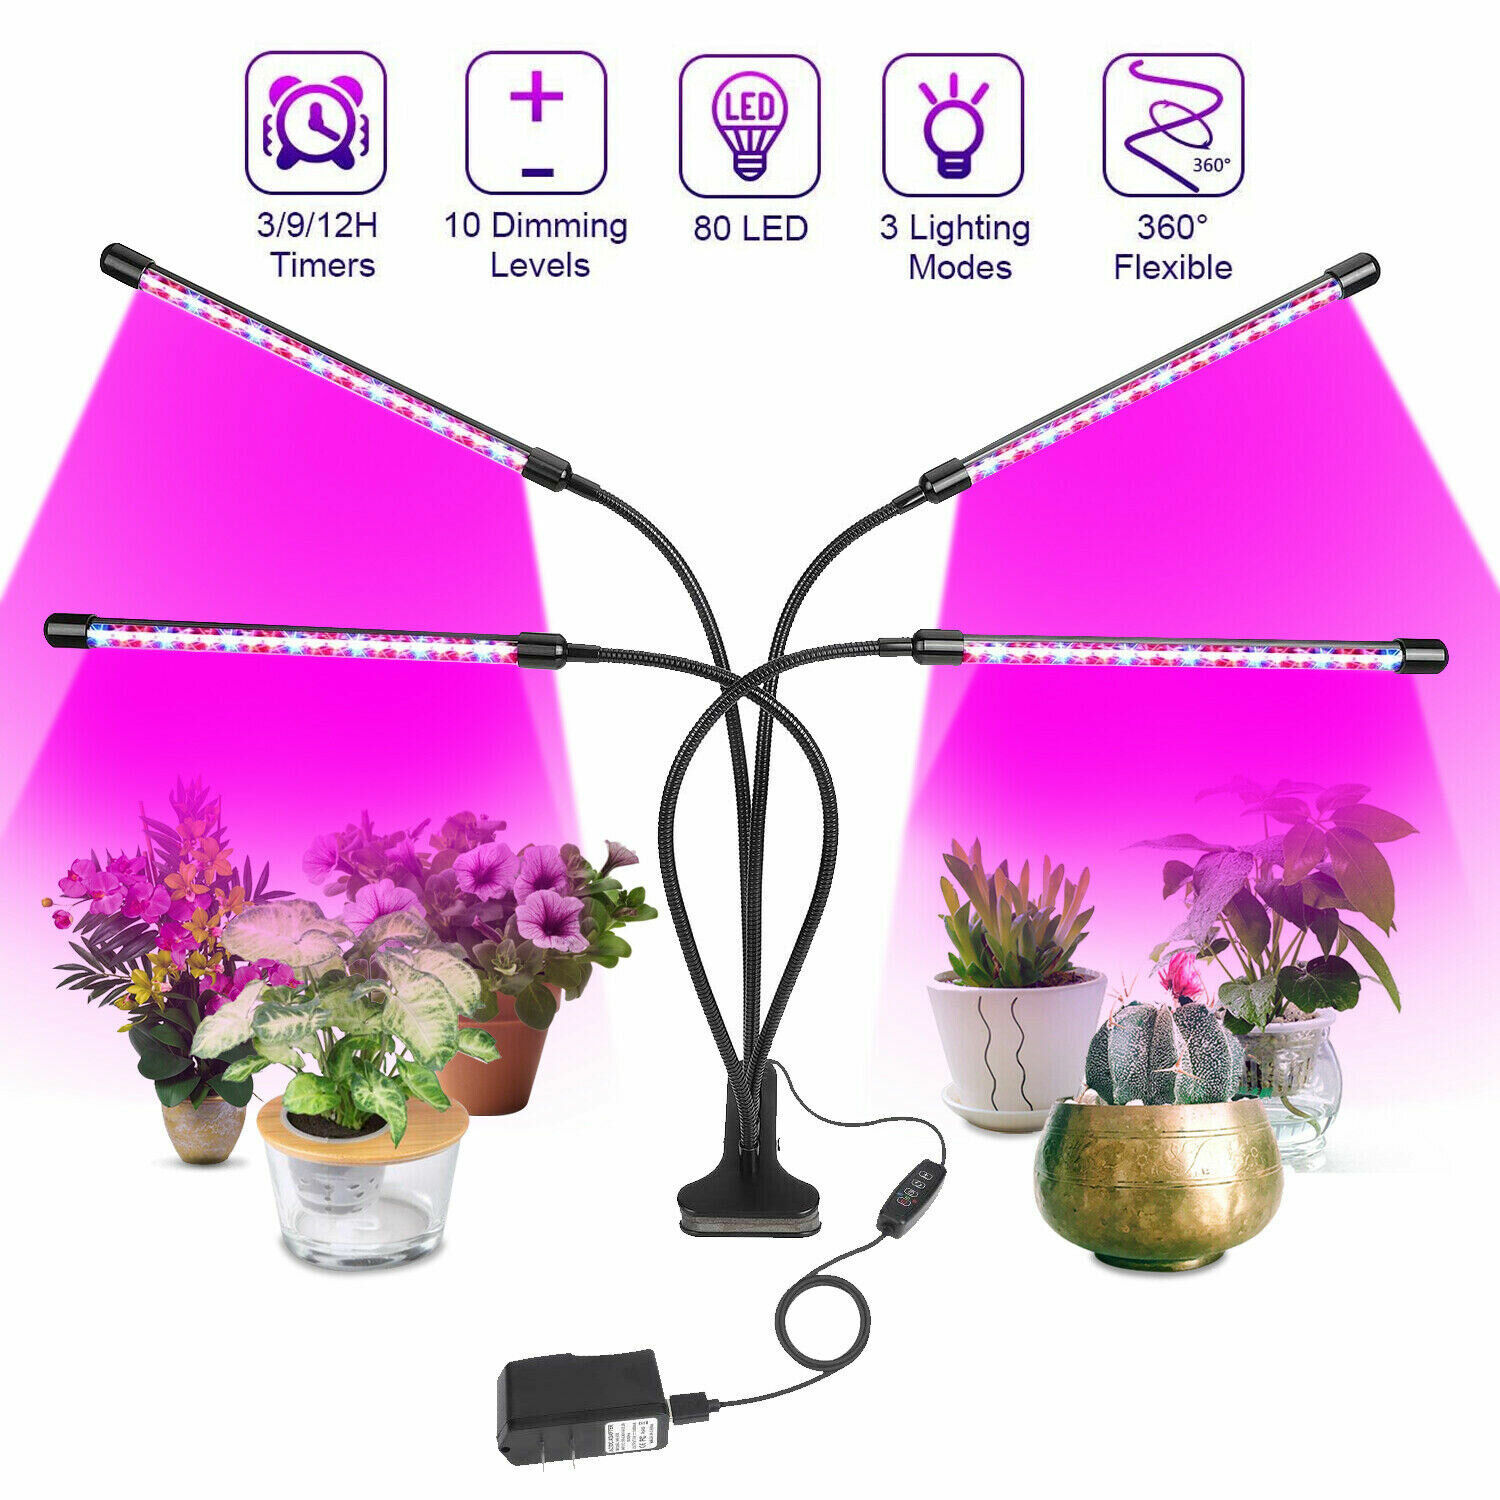 4 Heads 80 LED Grow Light Plant Growing Lamp for Indoor Plants Hydroponics USB